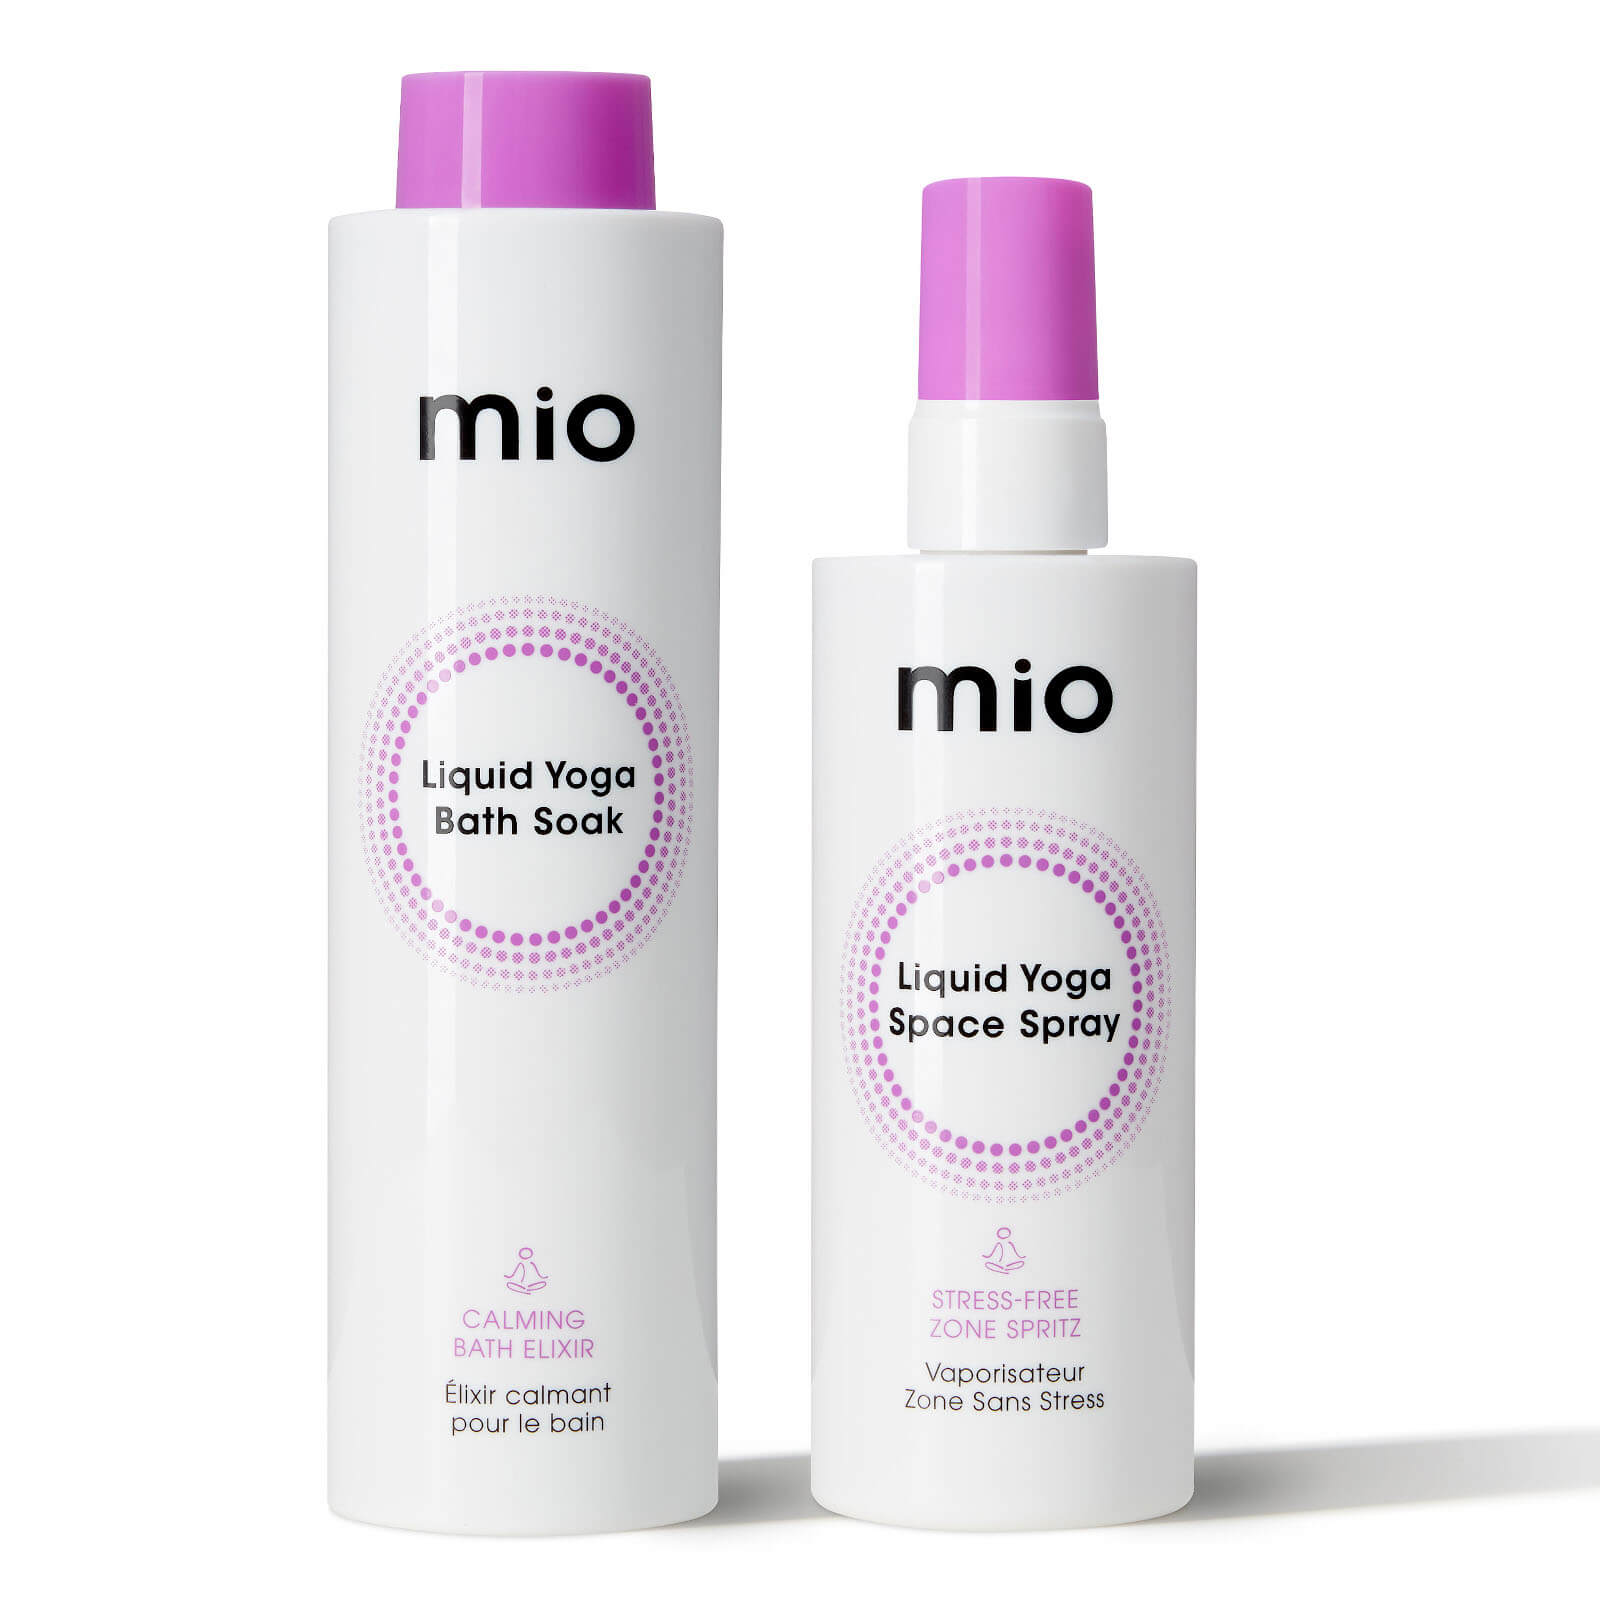 mio Relaxing Skin Routine Duo (worth £49.00)